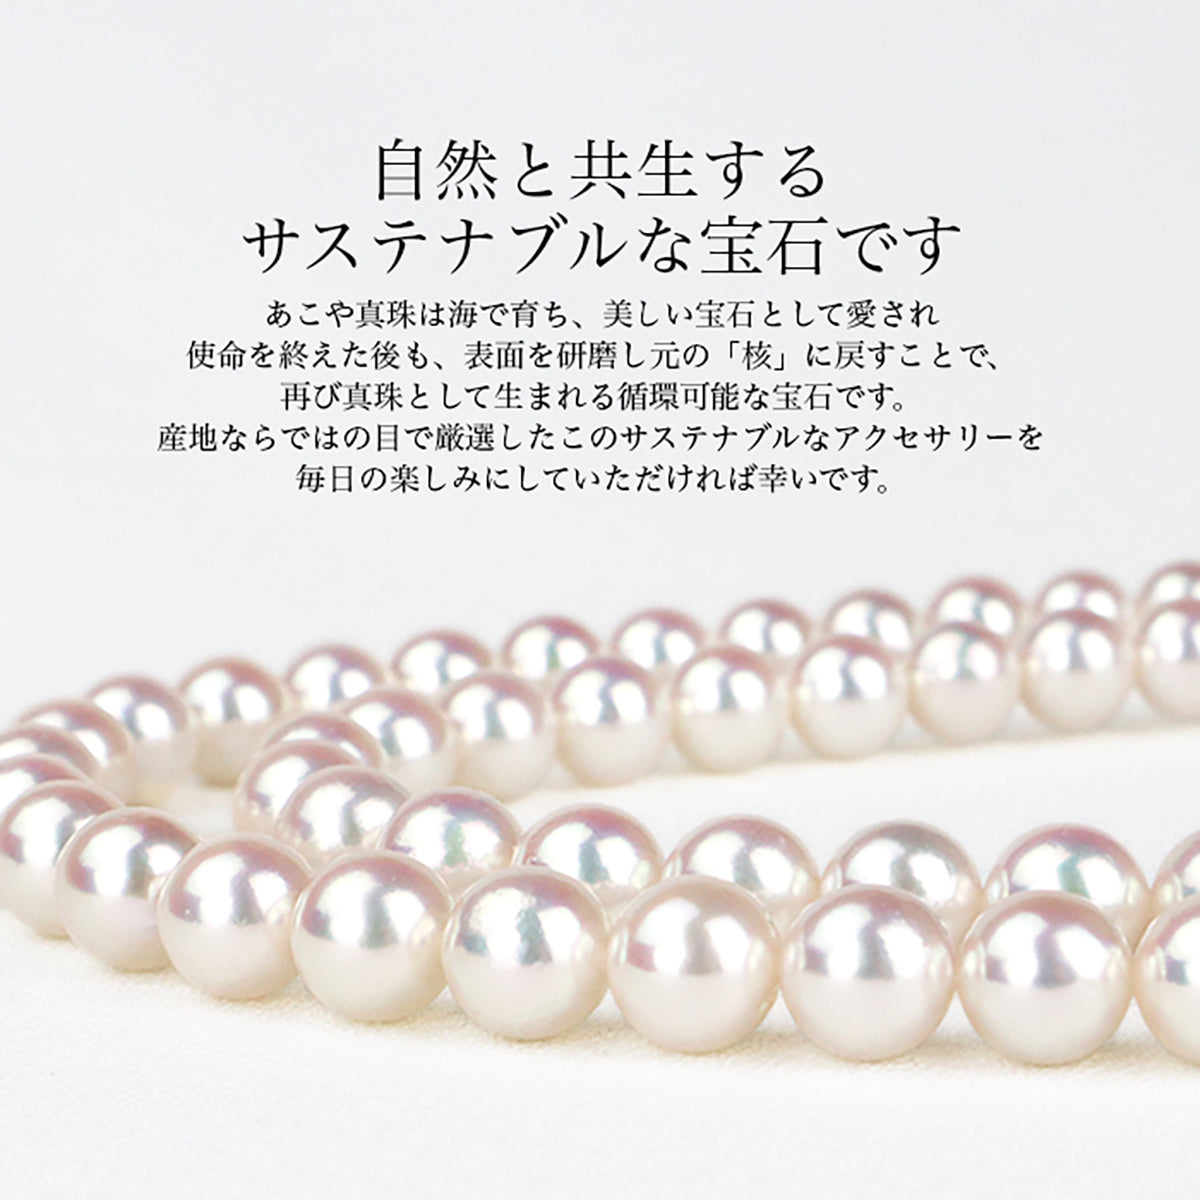 Akoya pearl single through necklace [available in 3 colors] Brass ≪Silver/Pink gold/Gold≫ 7.0-8.0mm pearl necklace